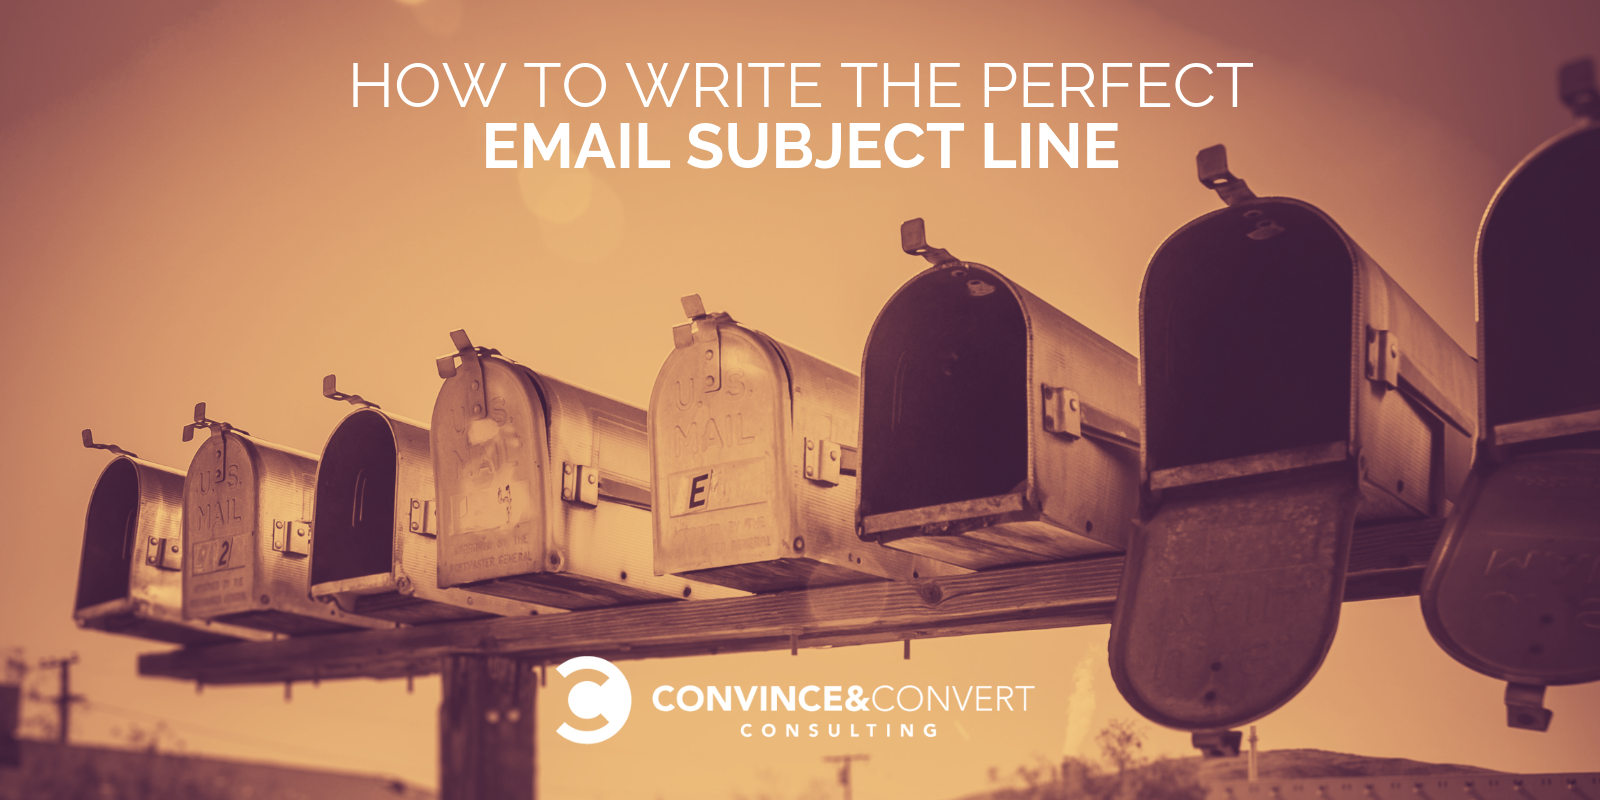 How to Write the Perfect Email Subject Line